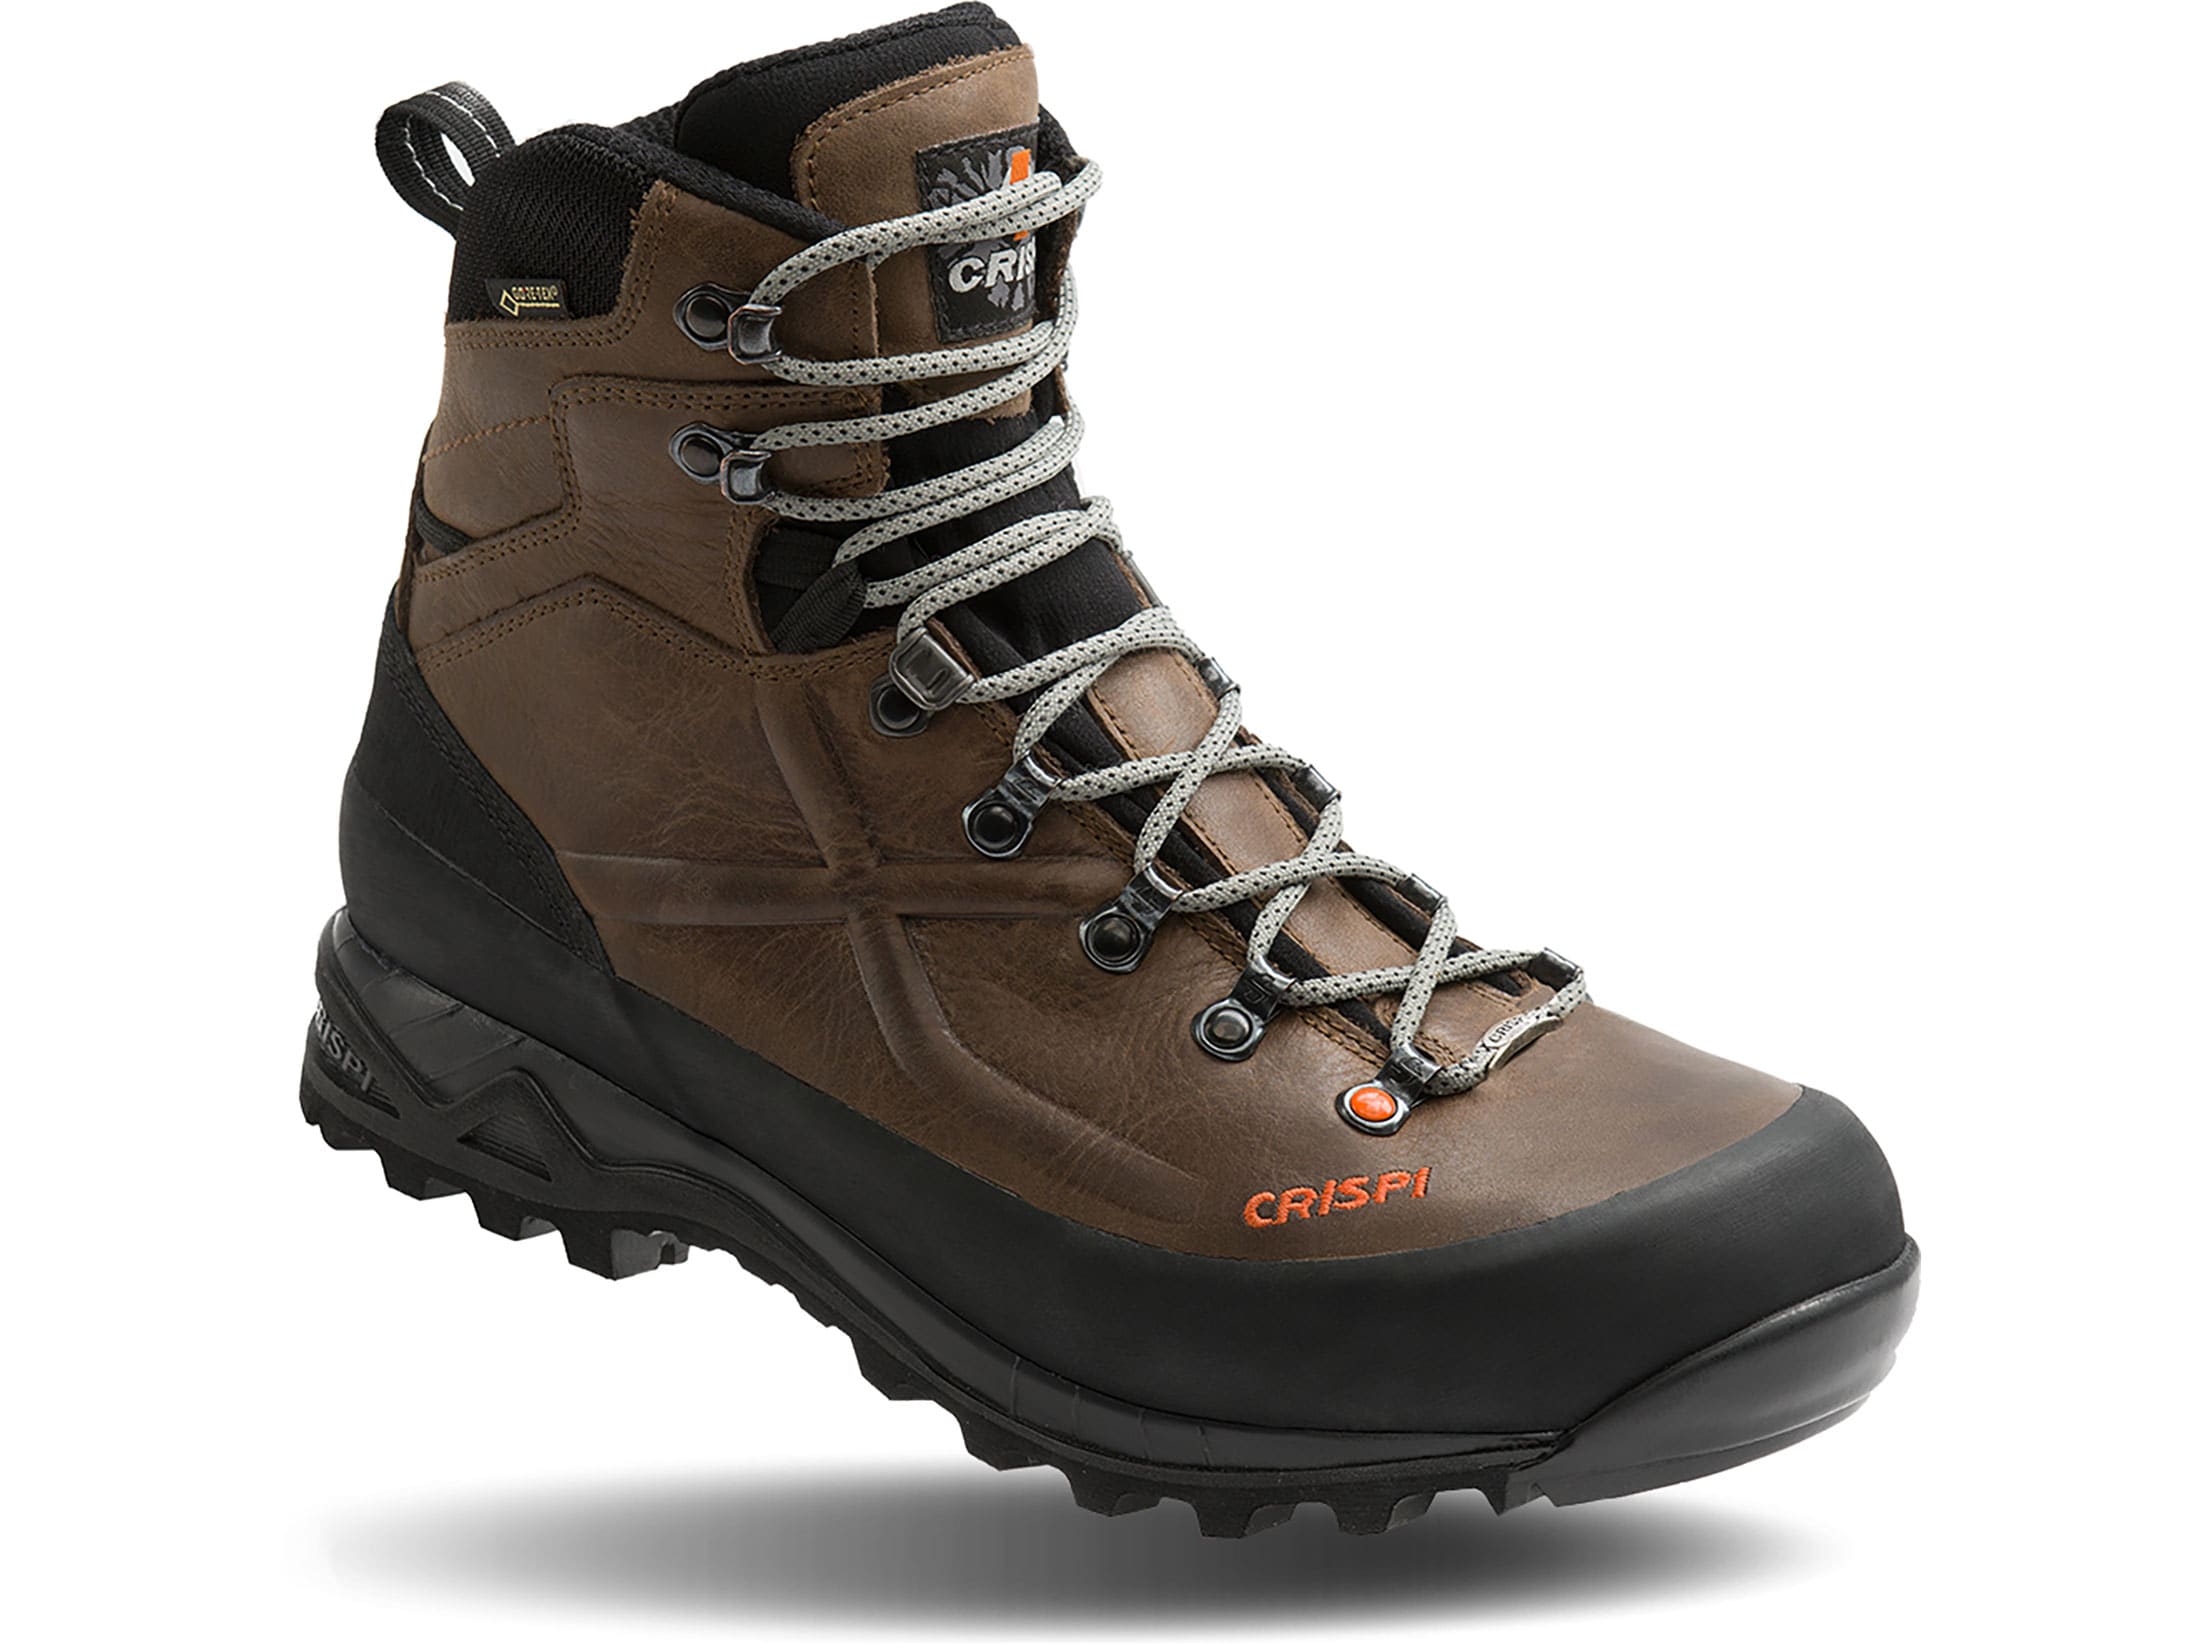 Opened Package - Crispi Valdres Plus GTX 8 GORE-TEX Hunting Boots